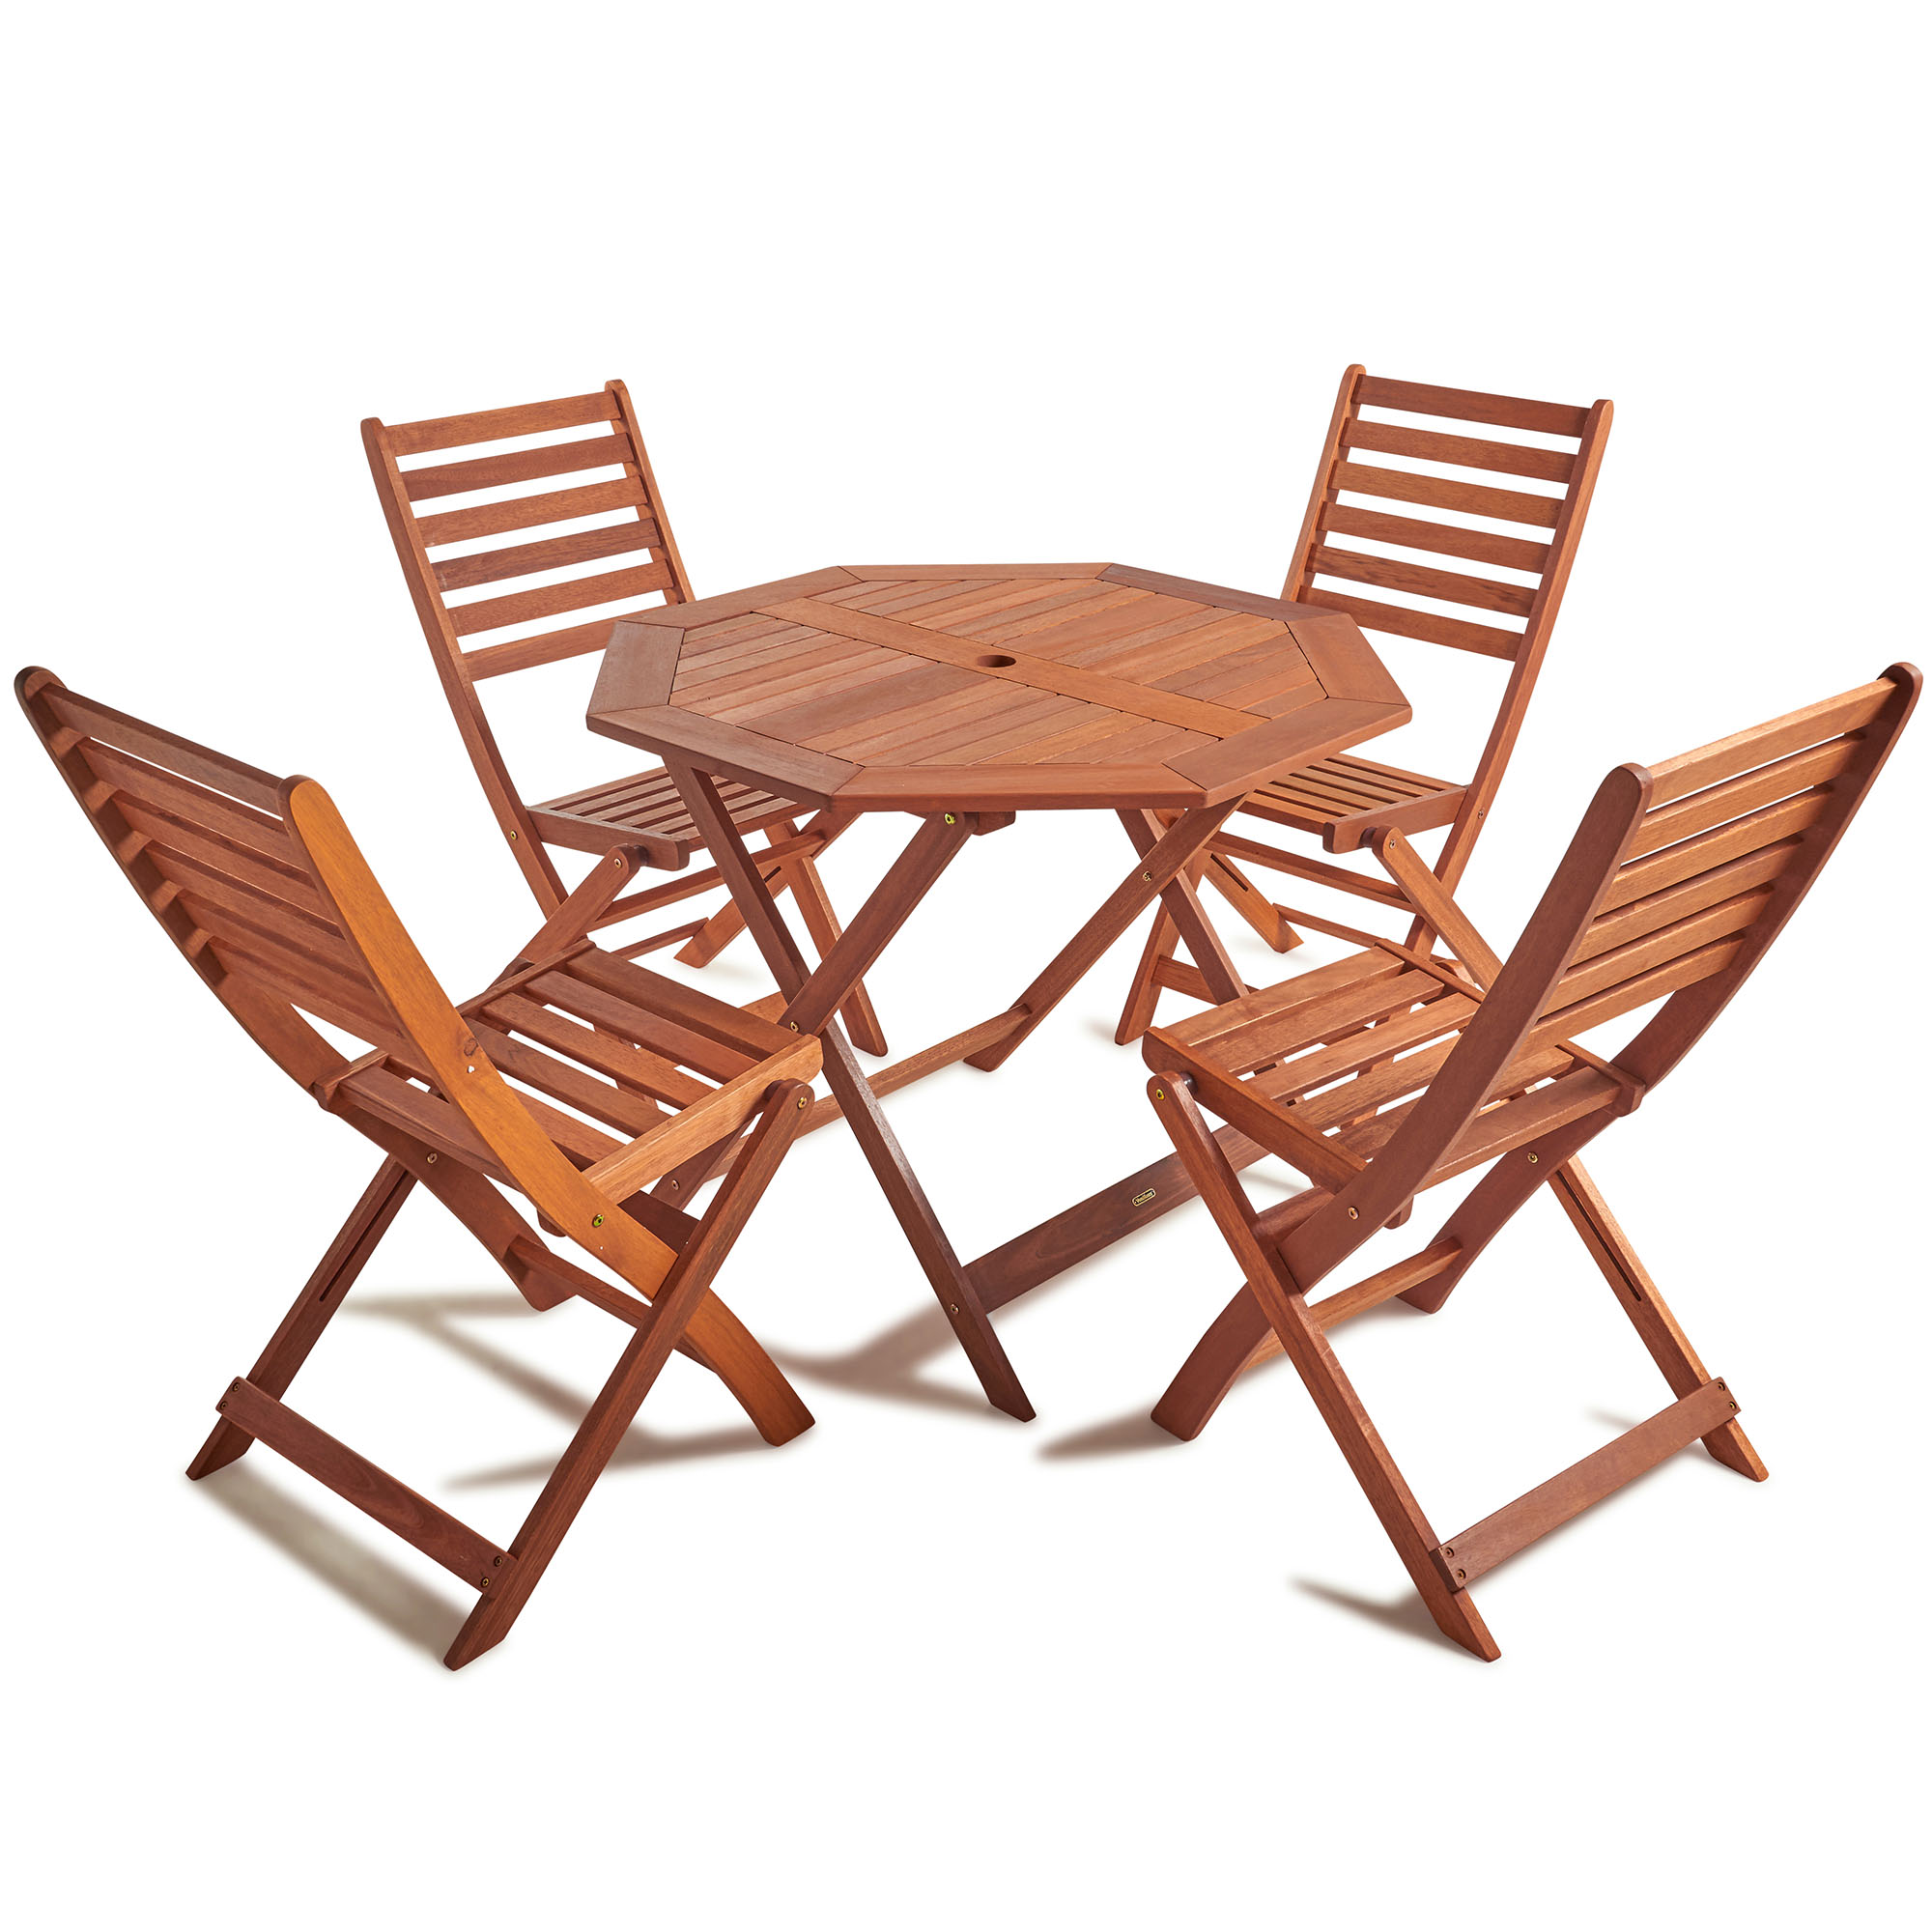 VonHaus 4 Seater Wooden Dining Set Rustic Table and Folding Chairs Patio Garden